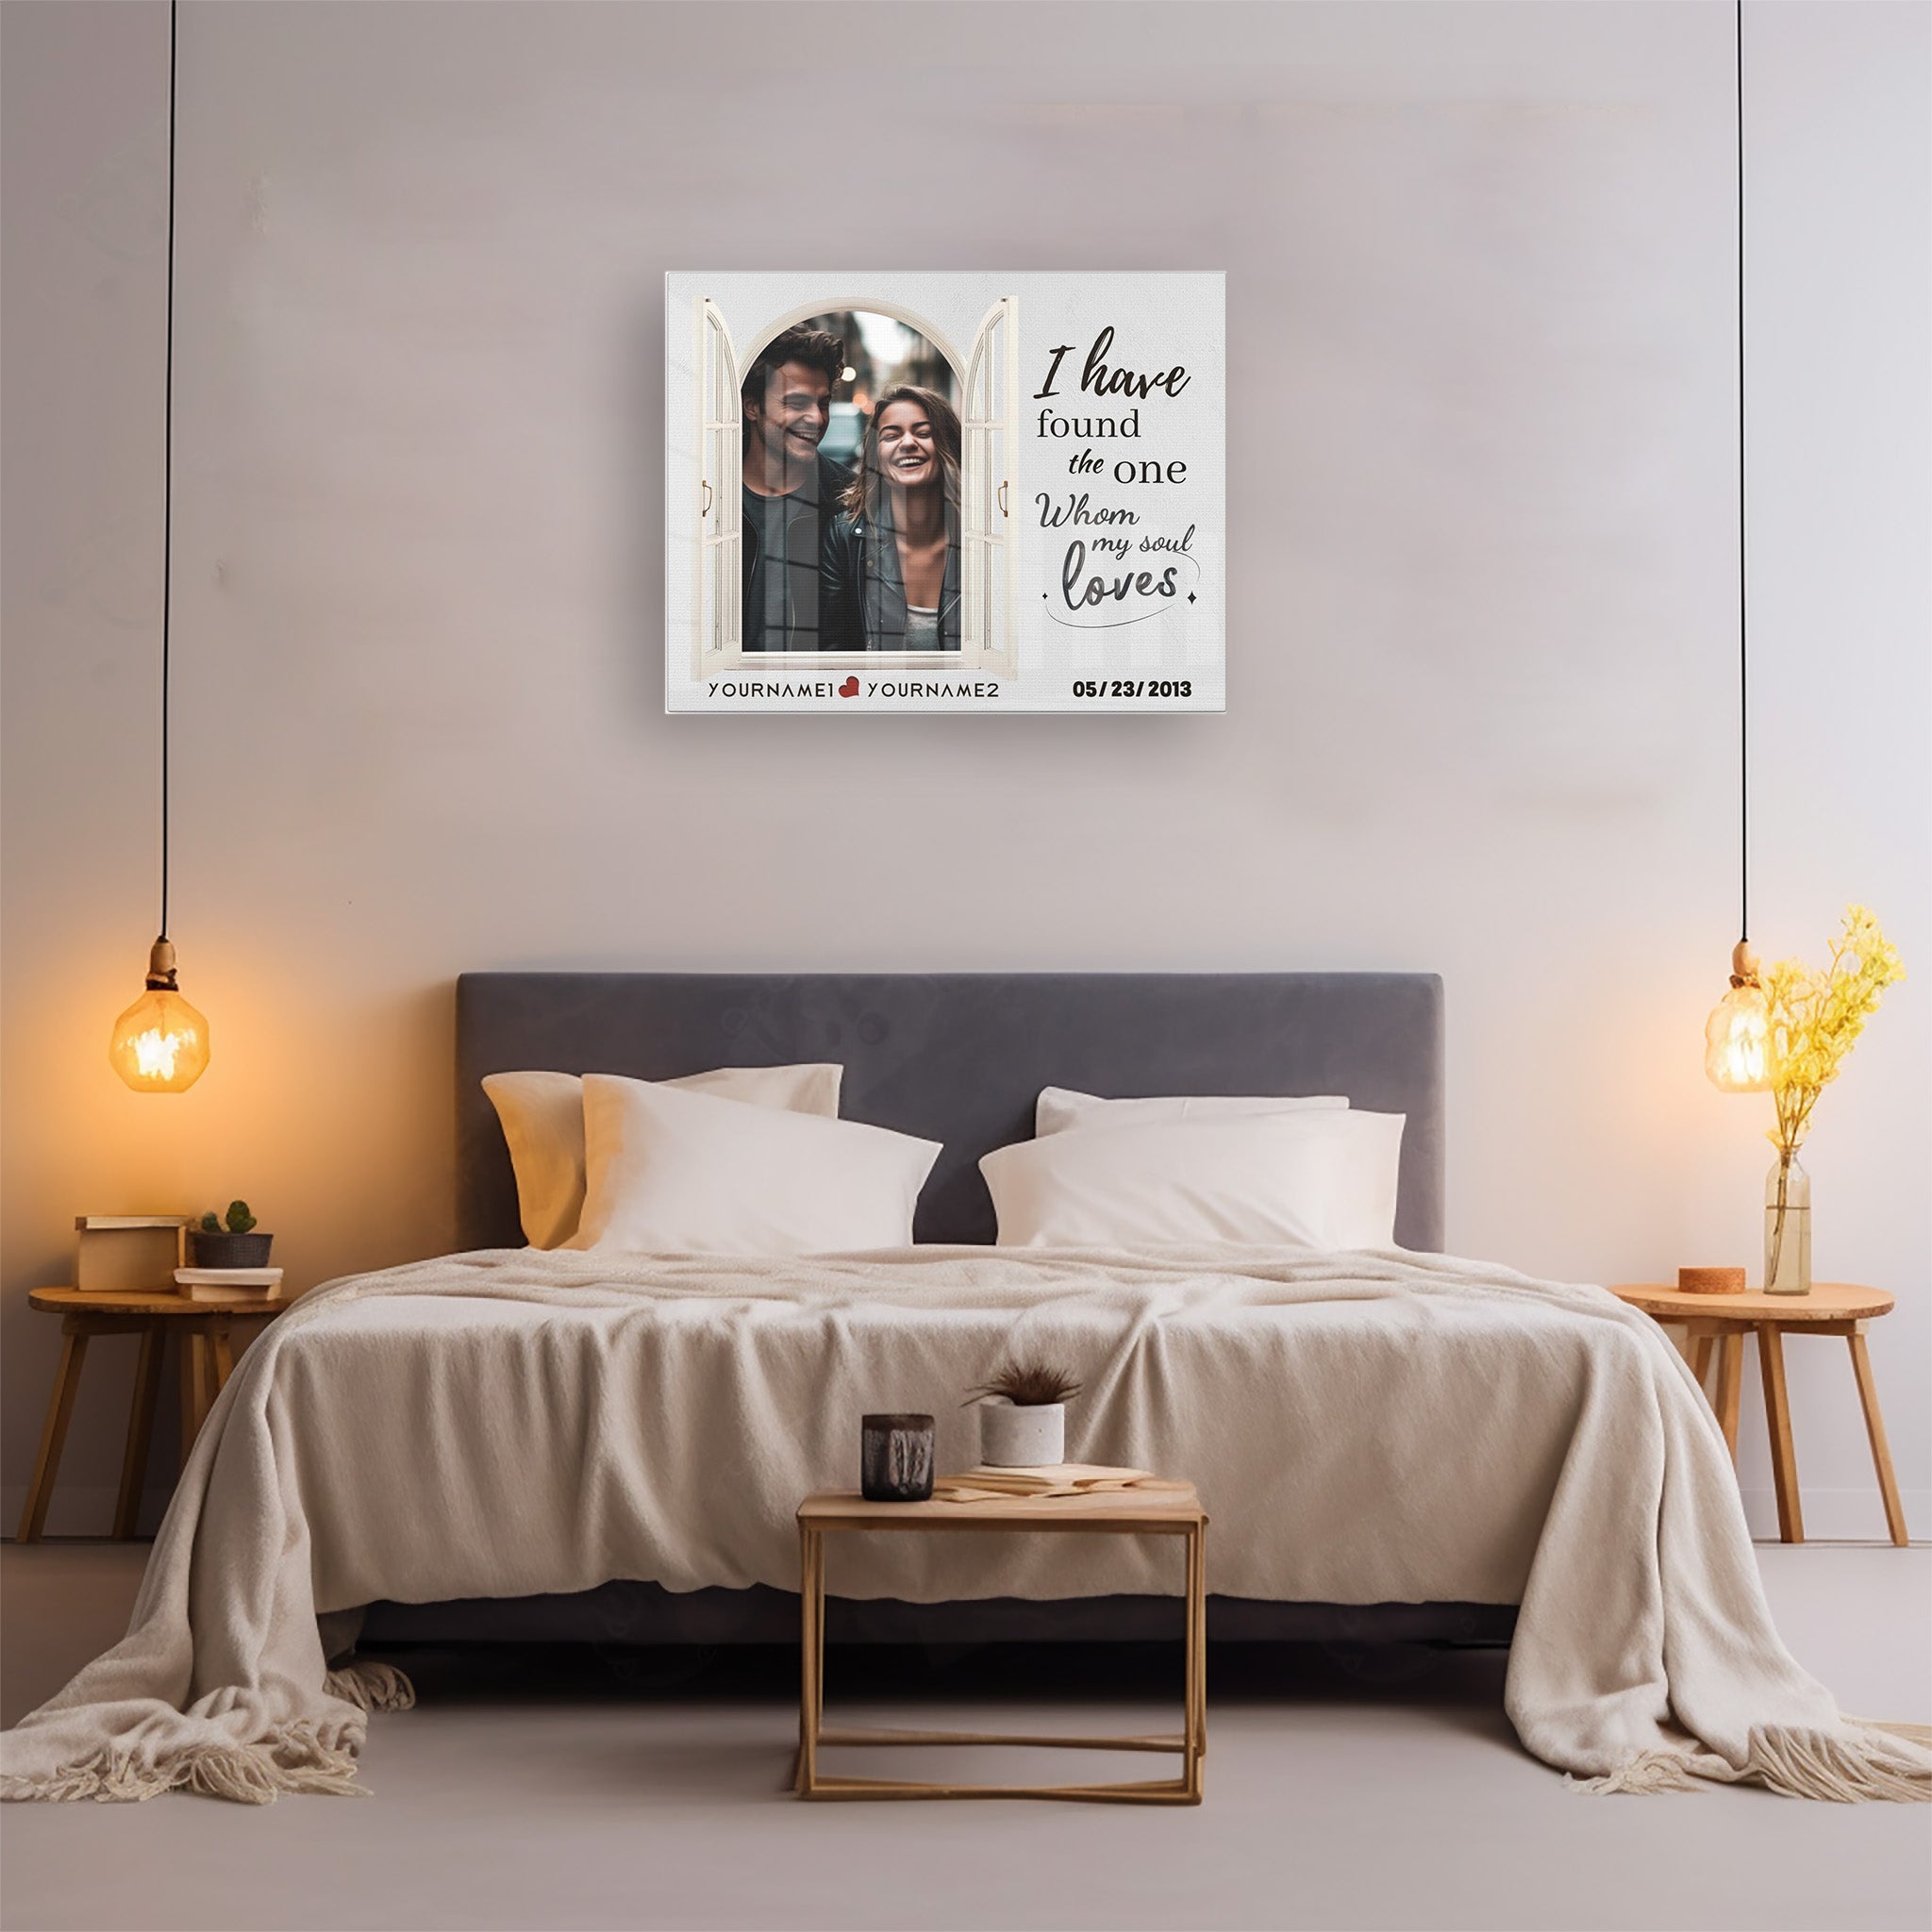 The One My Soul Loves, Light - Personalized Photo Canvas Print Anniversary Gifts